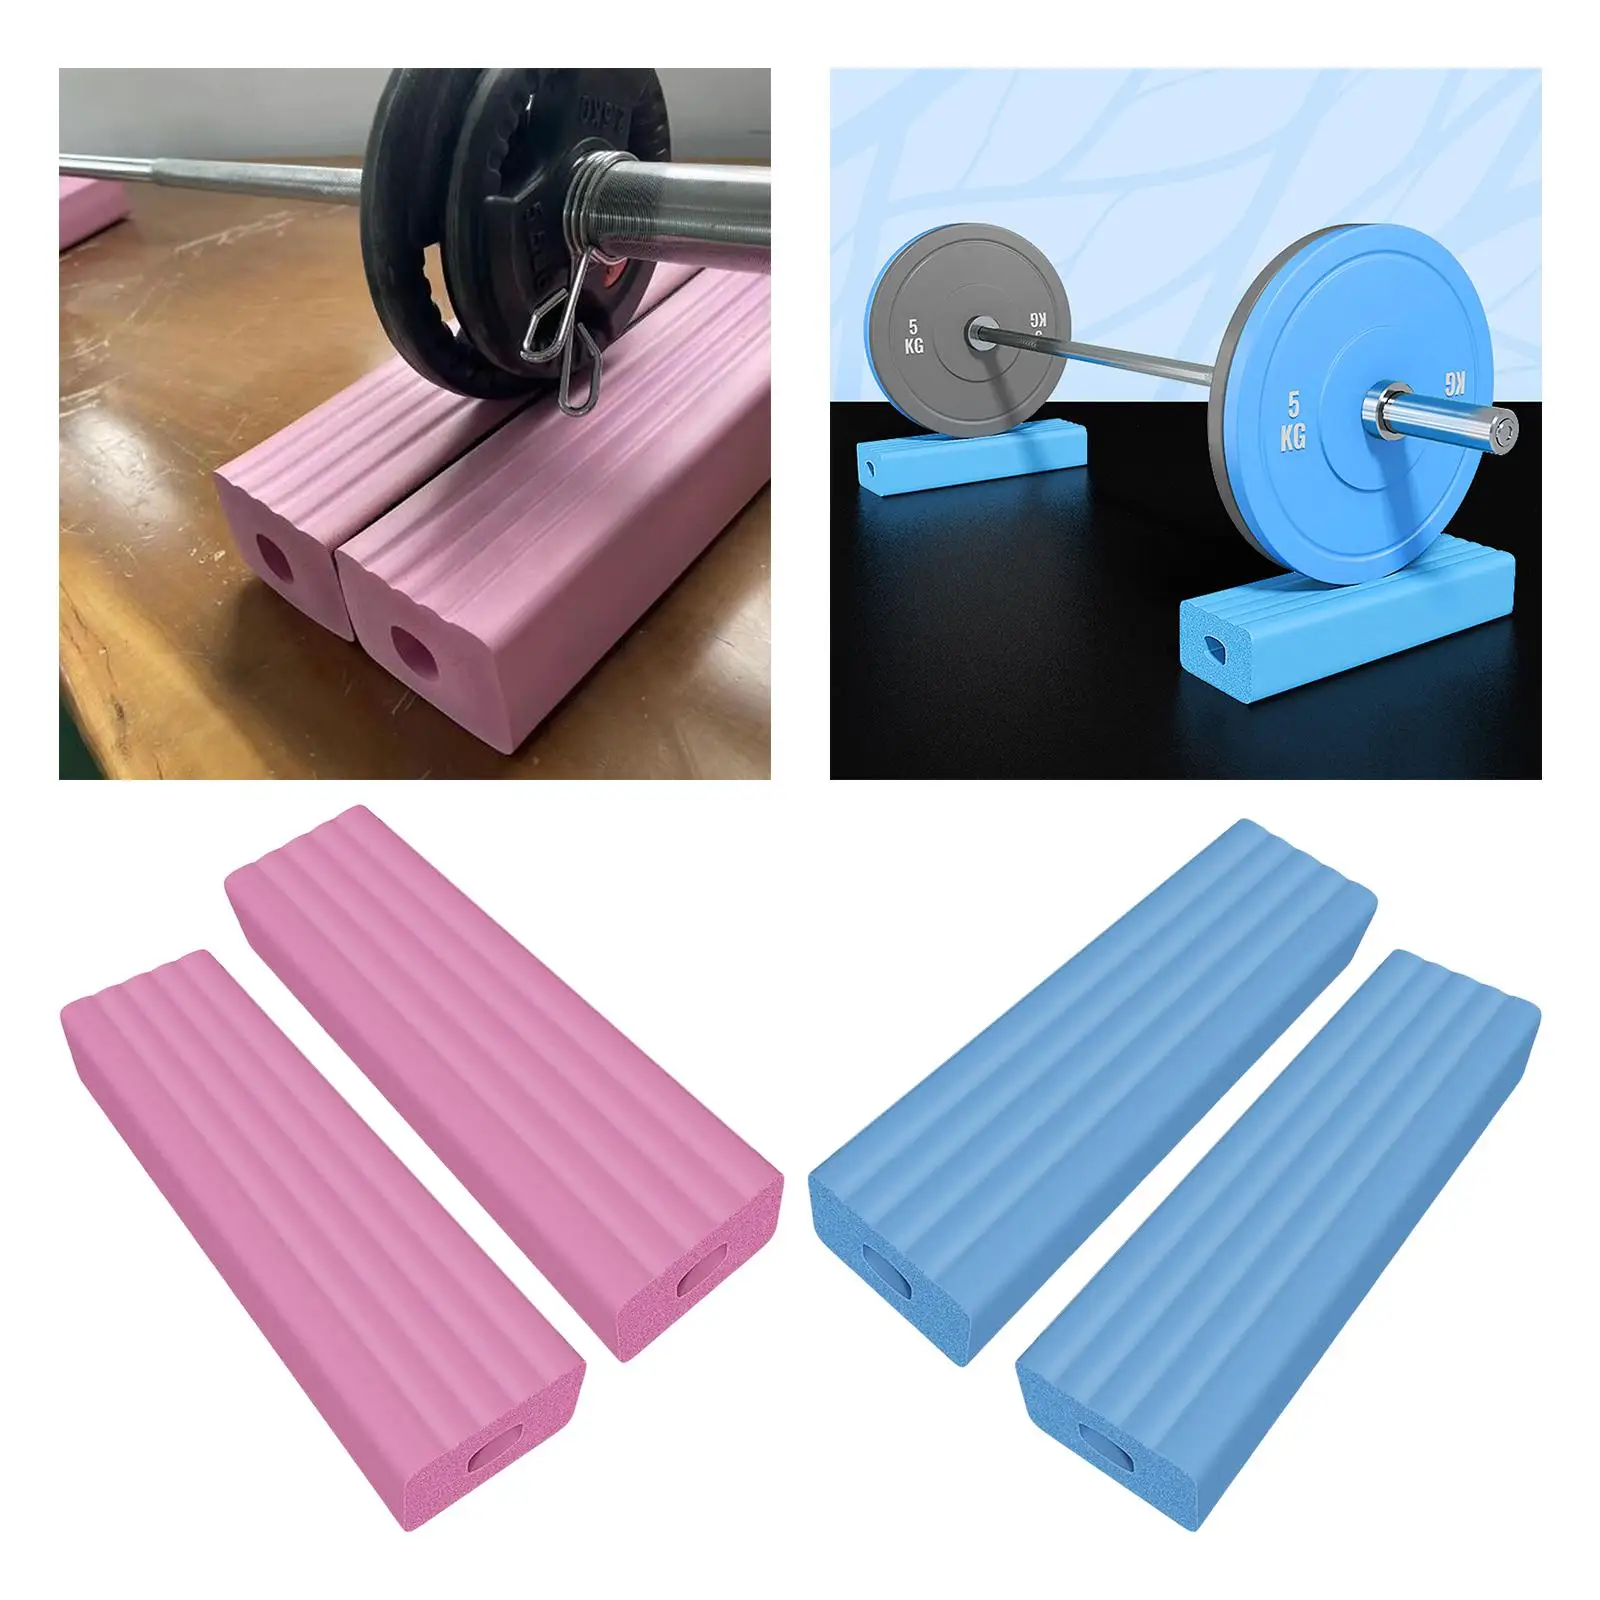 Foam Rubber Weightlifting Cushion Storage Mat Weightlifting Protector Falling